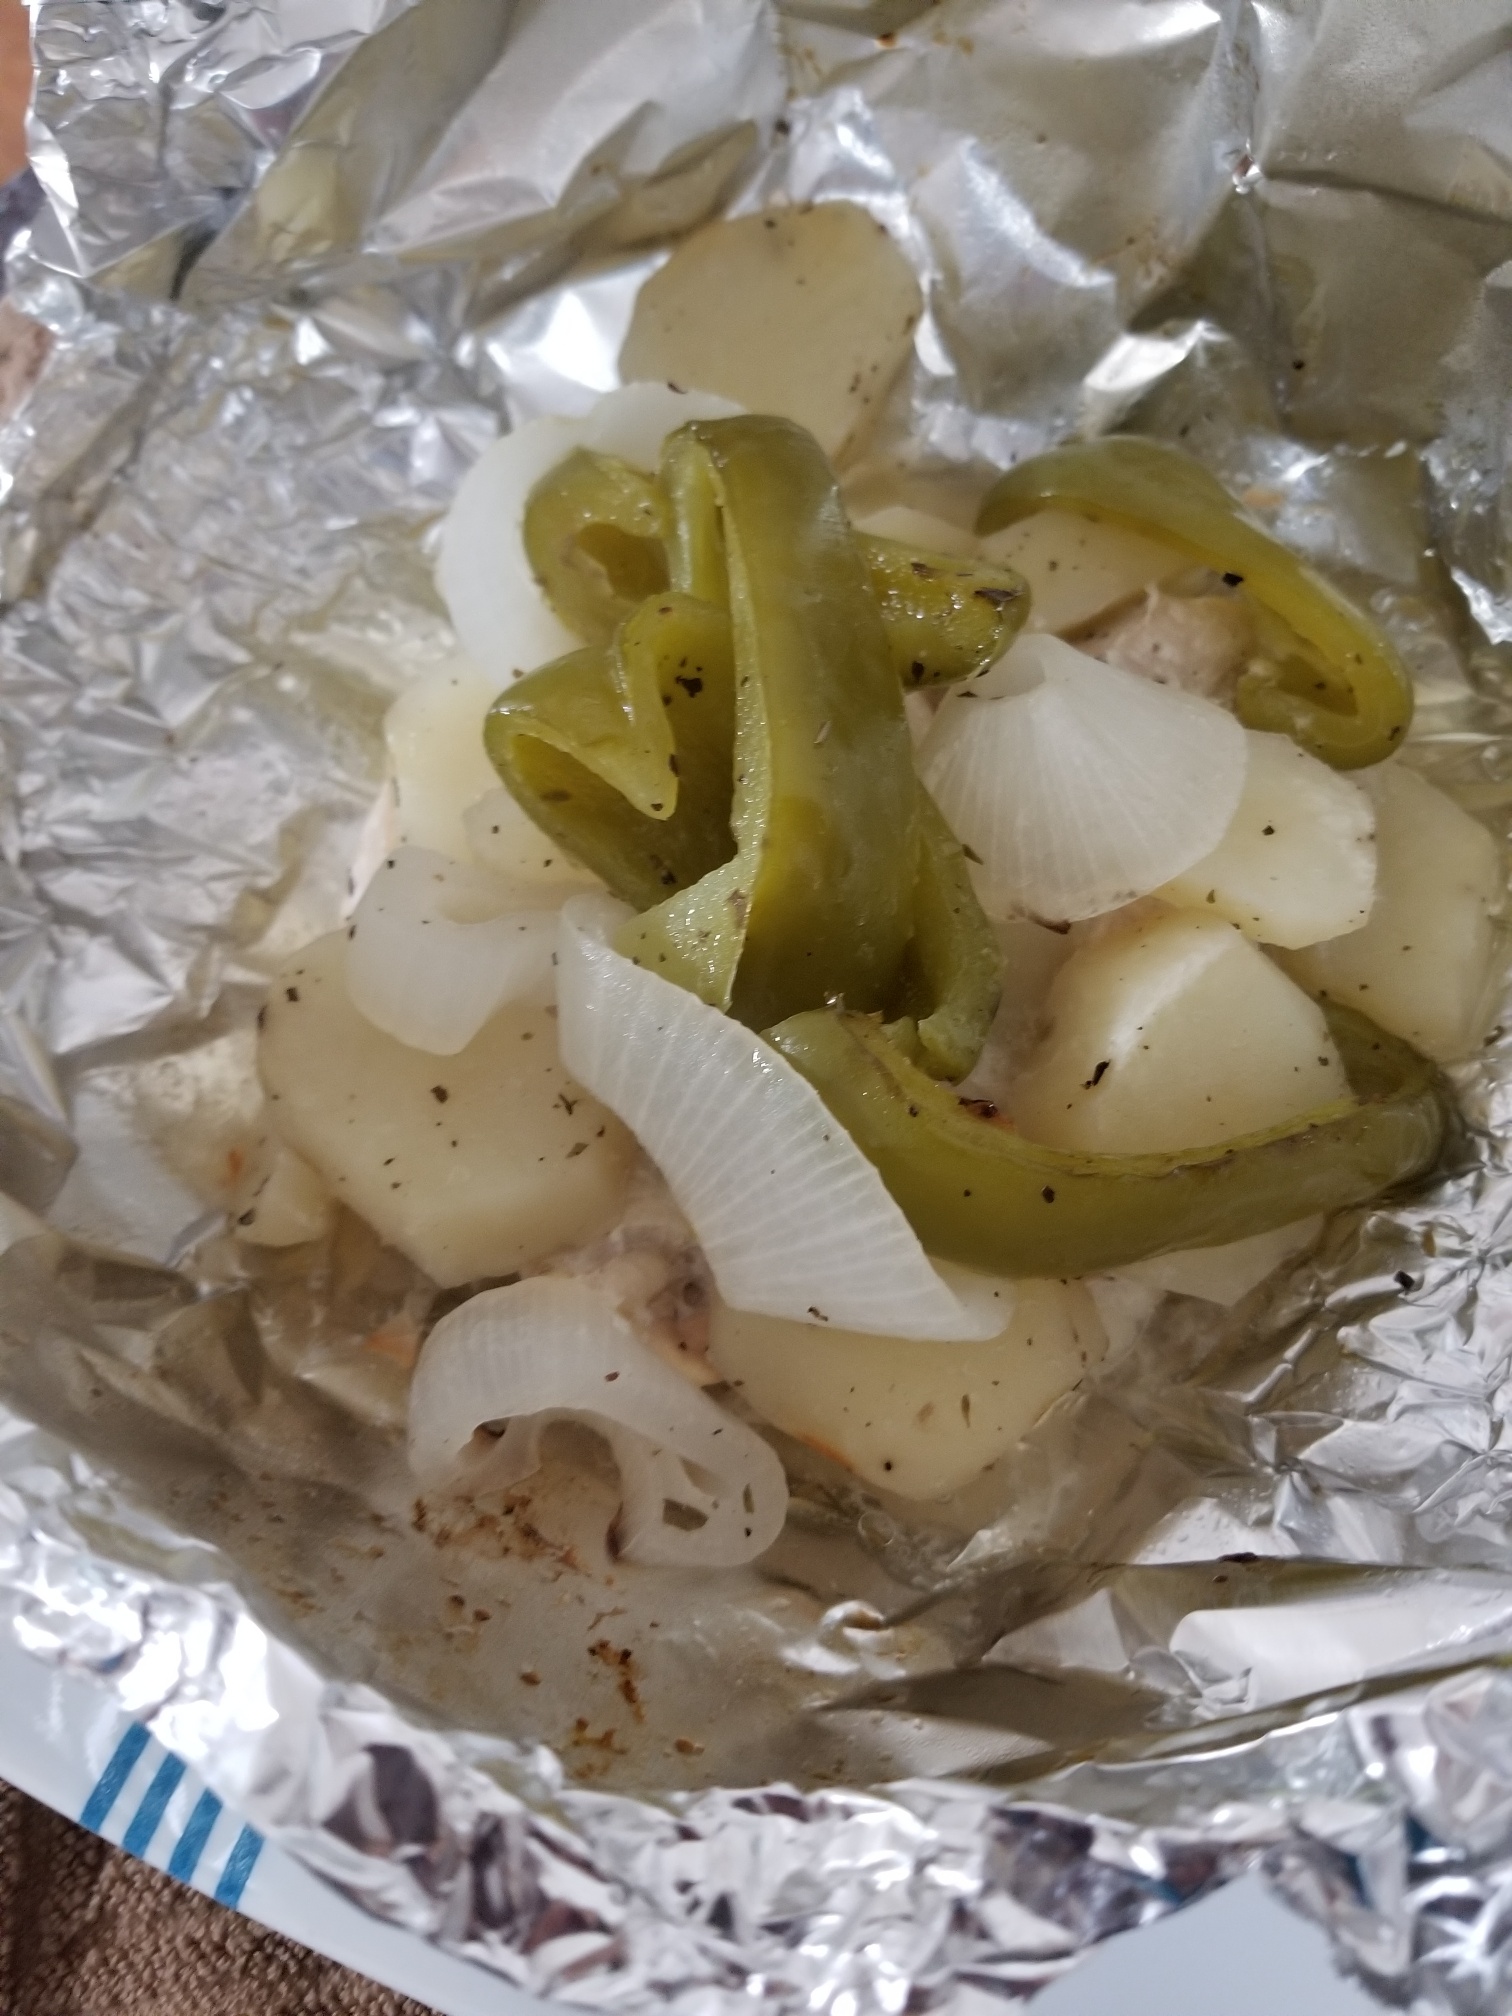 <p>Here's another quick, easy, and delicious foil pack dinner. "I made this camping," says reviewer Pharmcook. "It was a hit with everyone including the little ones and clean up was so nice!'</p>
                          